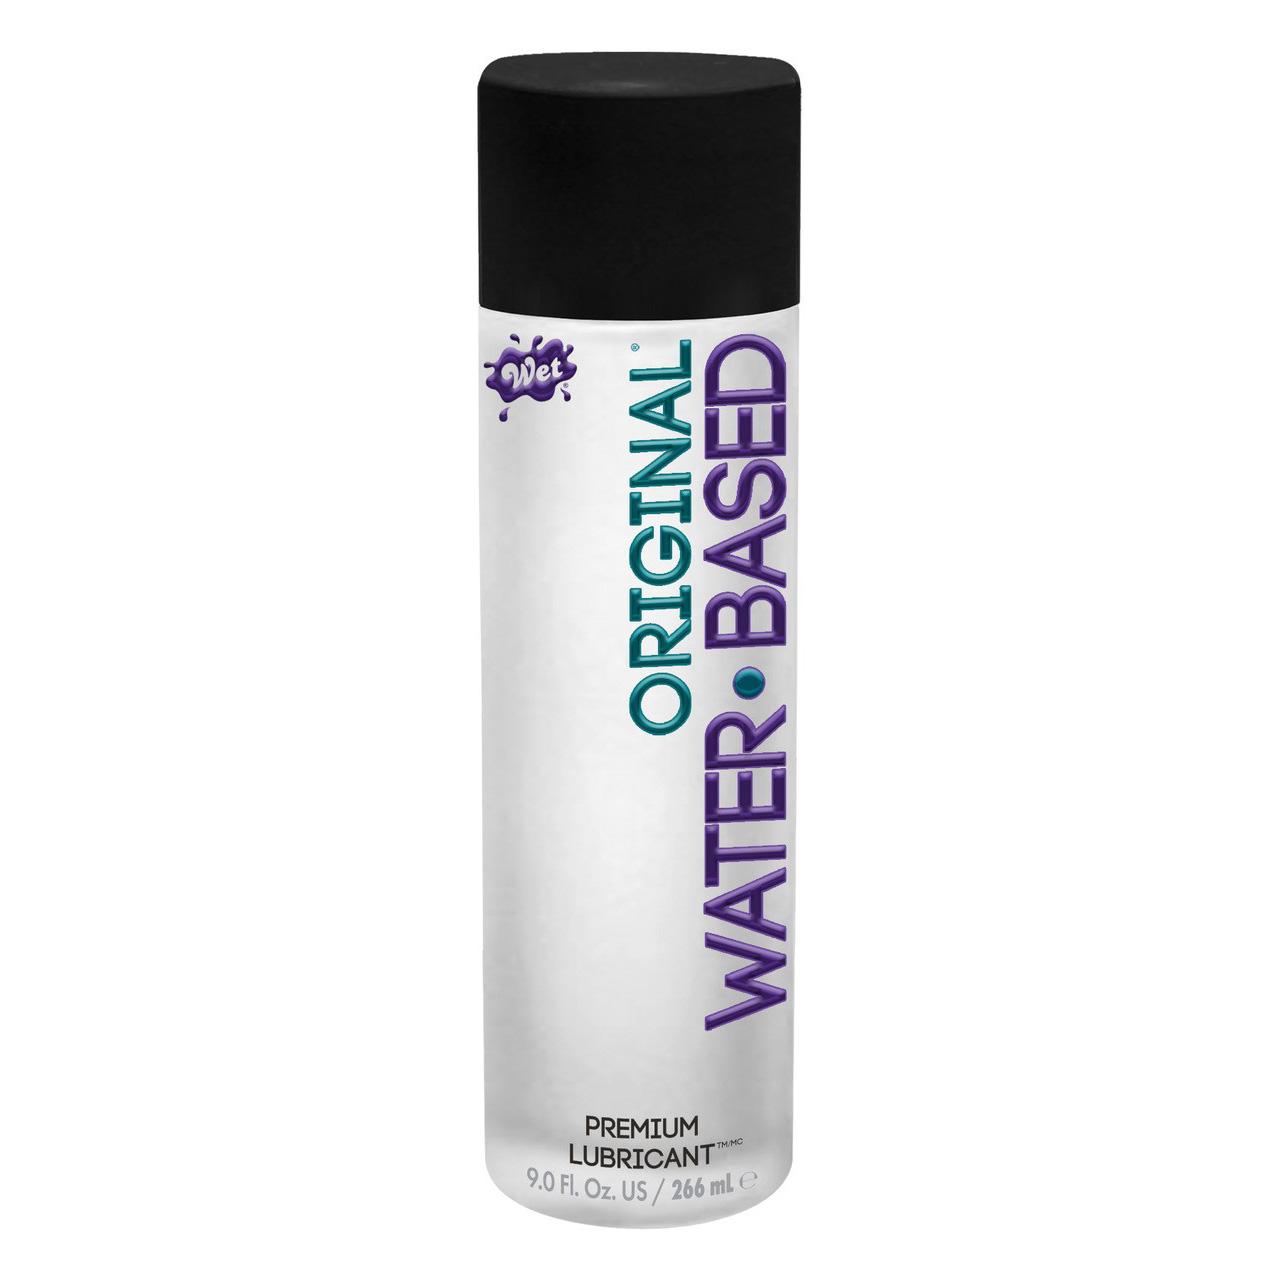 Free Wet Lubricant from WetLubes